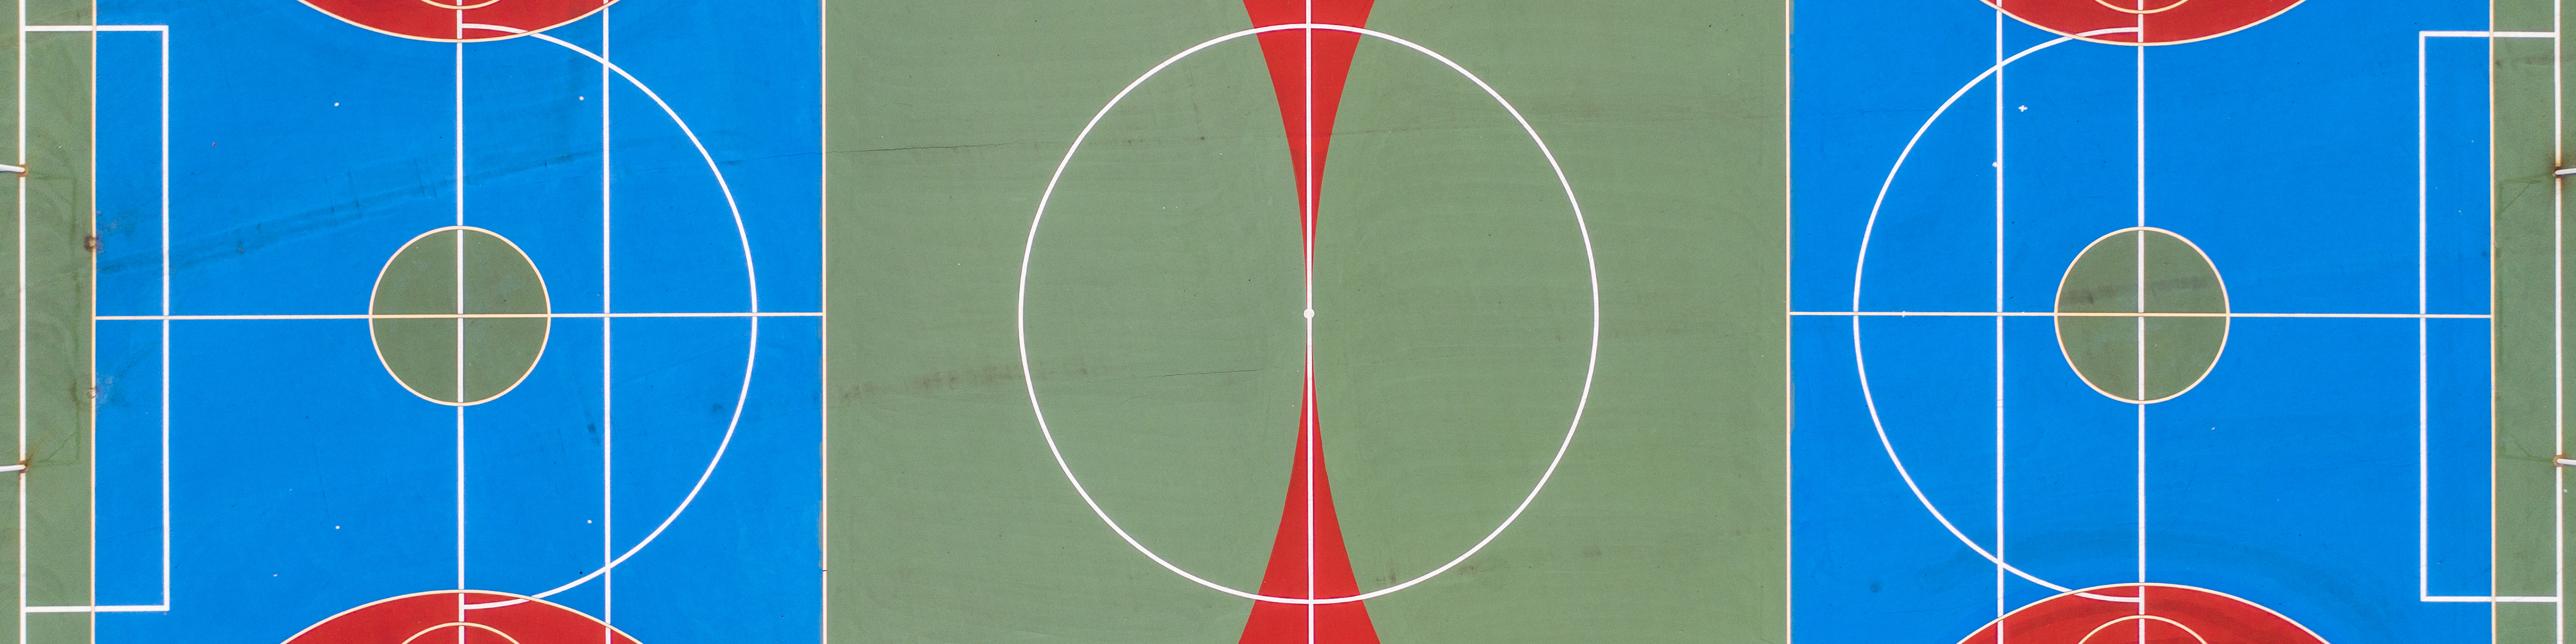 An overhead view of a hard-surface soccer field in red, green, and blue